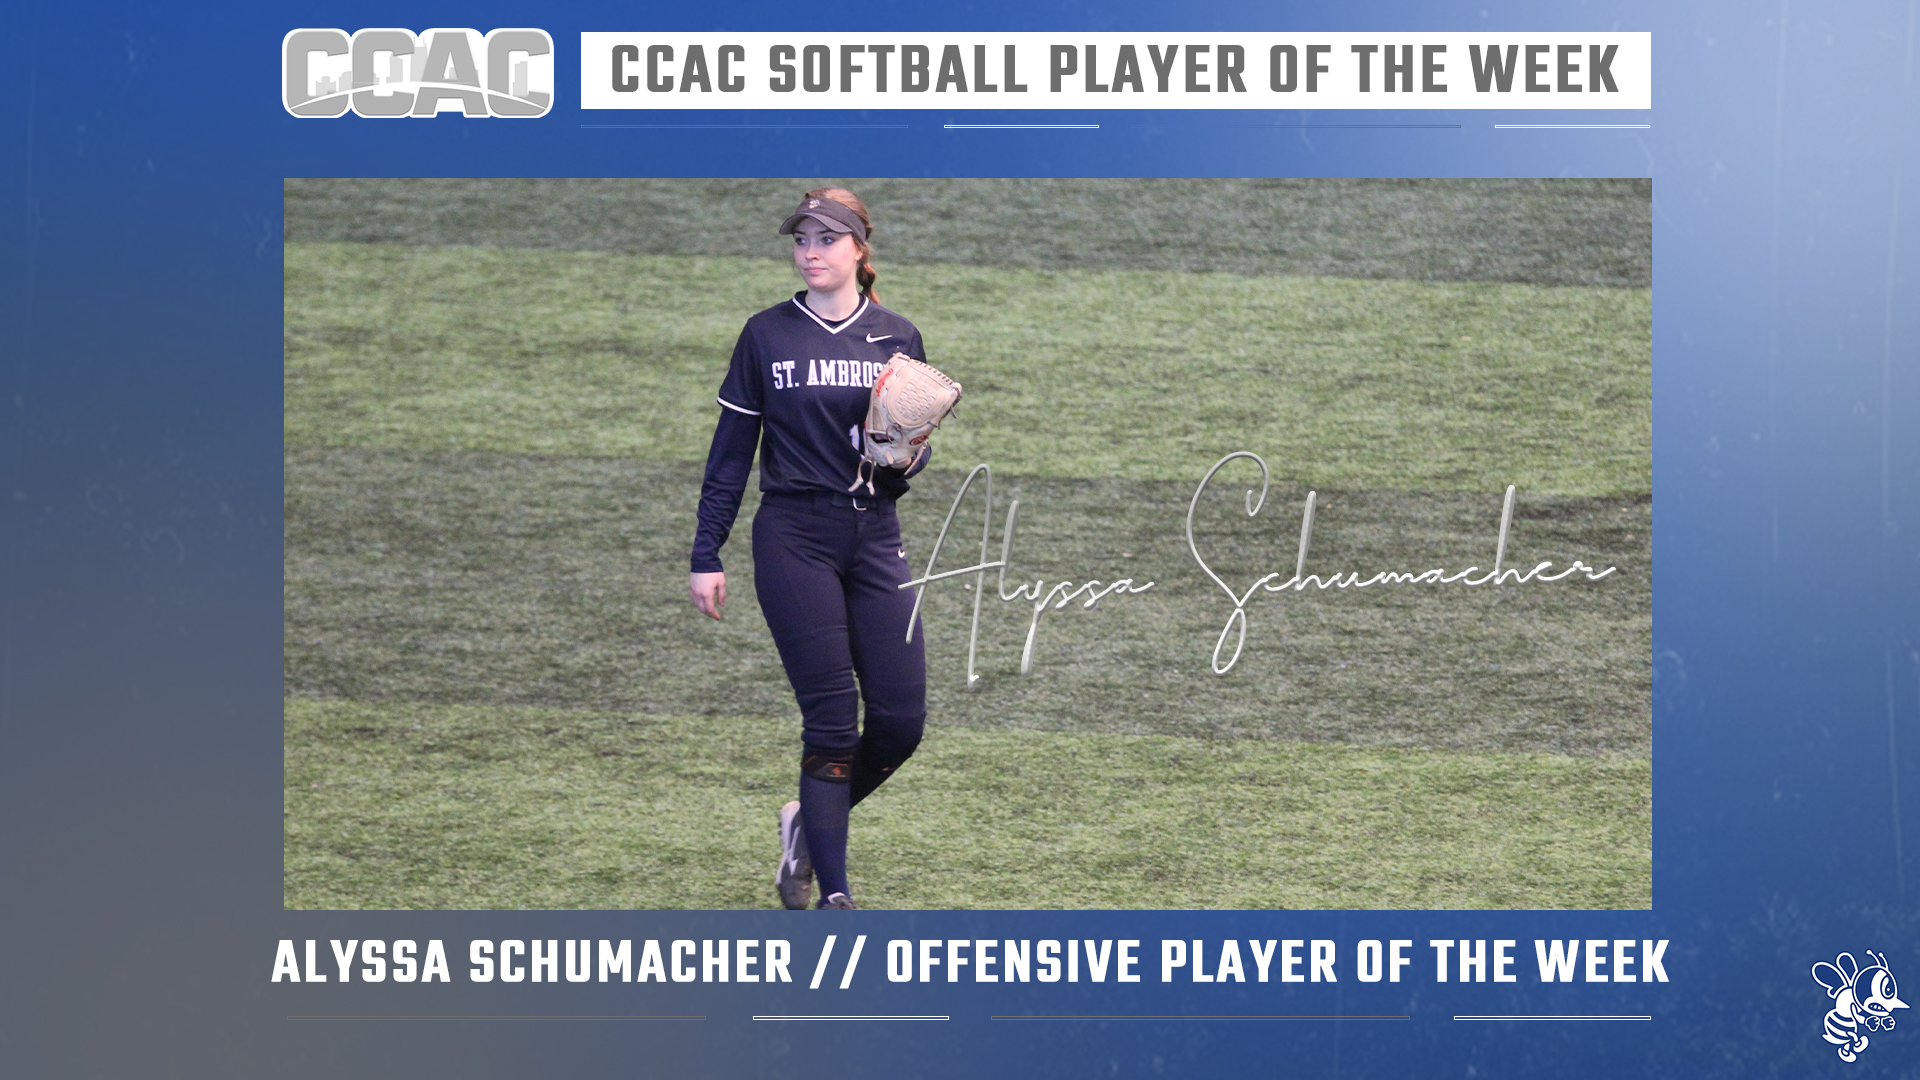 Schumacher named CCAC Player of the Week